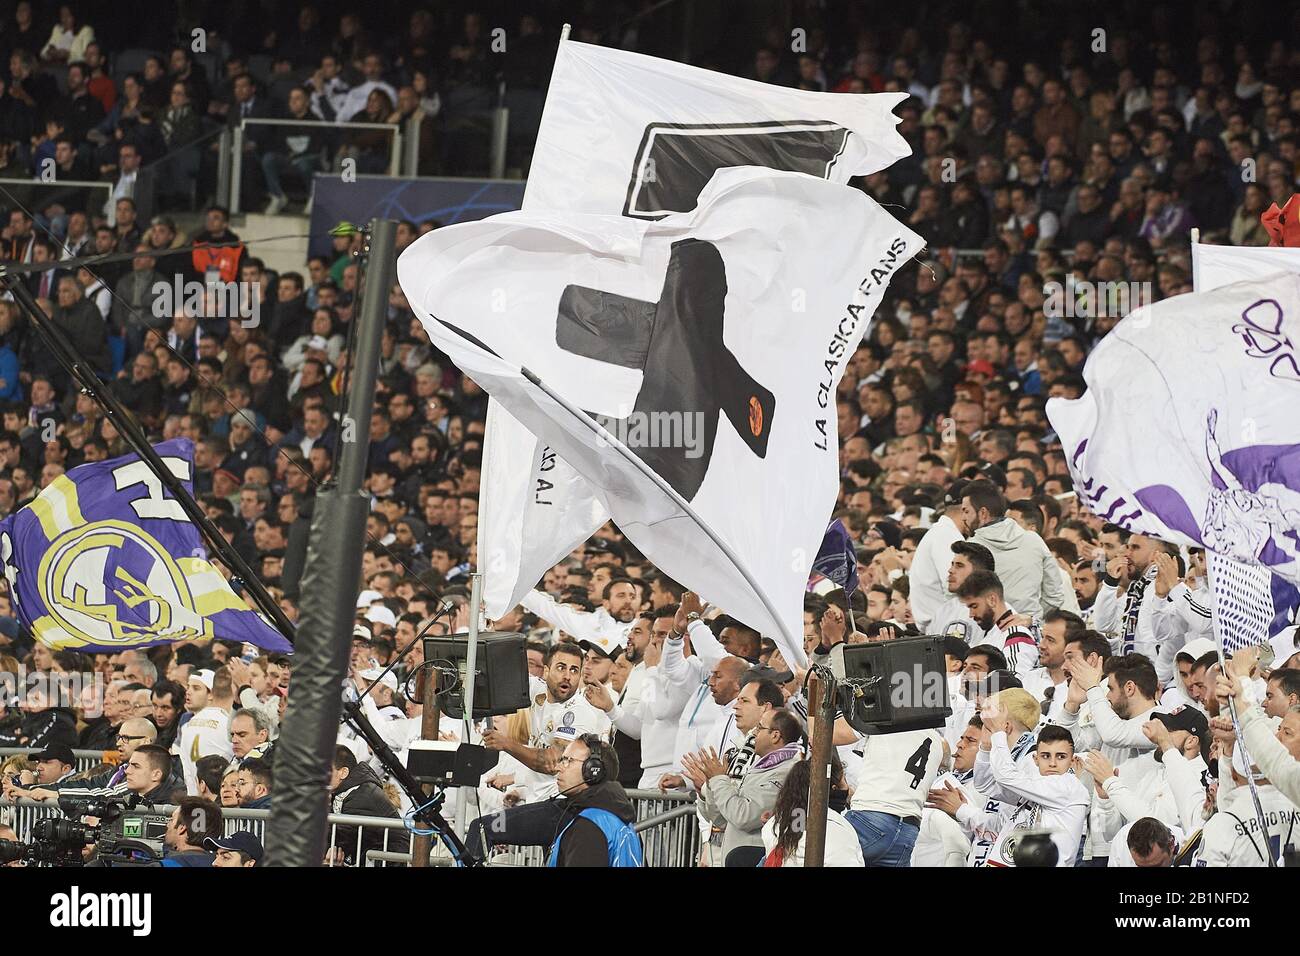 Madrid, Spain. 26th Feb, 2020. Atmosphere during the UEFA Champions League round of 16 first leg match between Real Madrid and Manchester City F.C. at Santiago Bernabeu on February 26, 2020 in Madrid, Spain Credit: Jack Abuin/ZUMA Wire/Alamy Live News Stock Photo